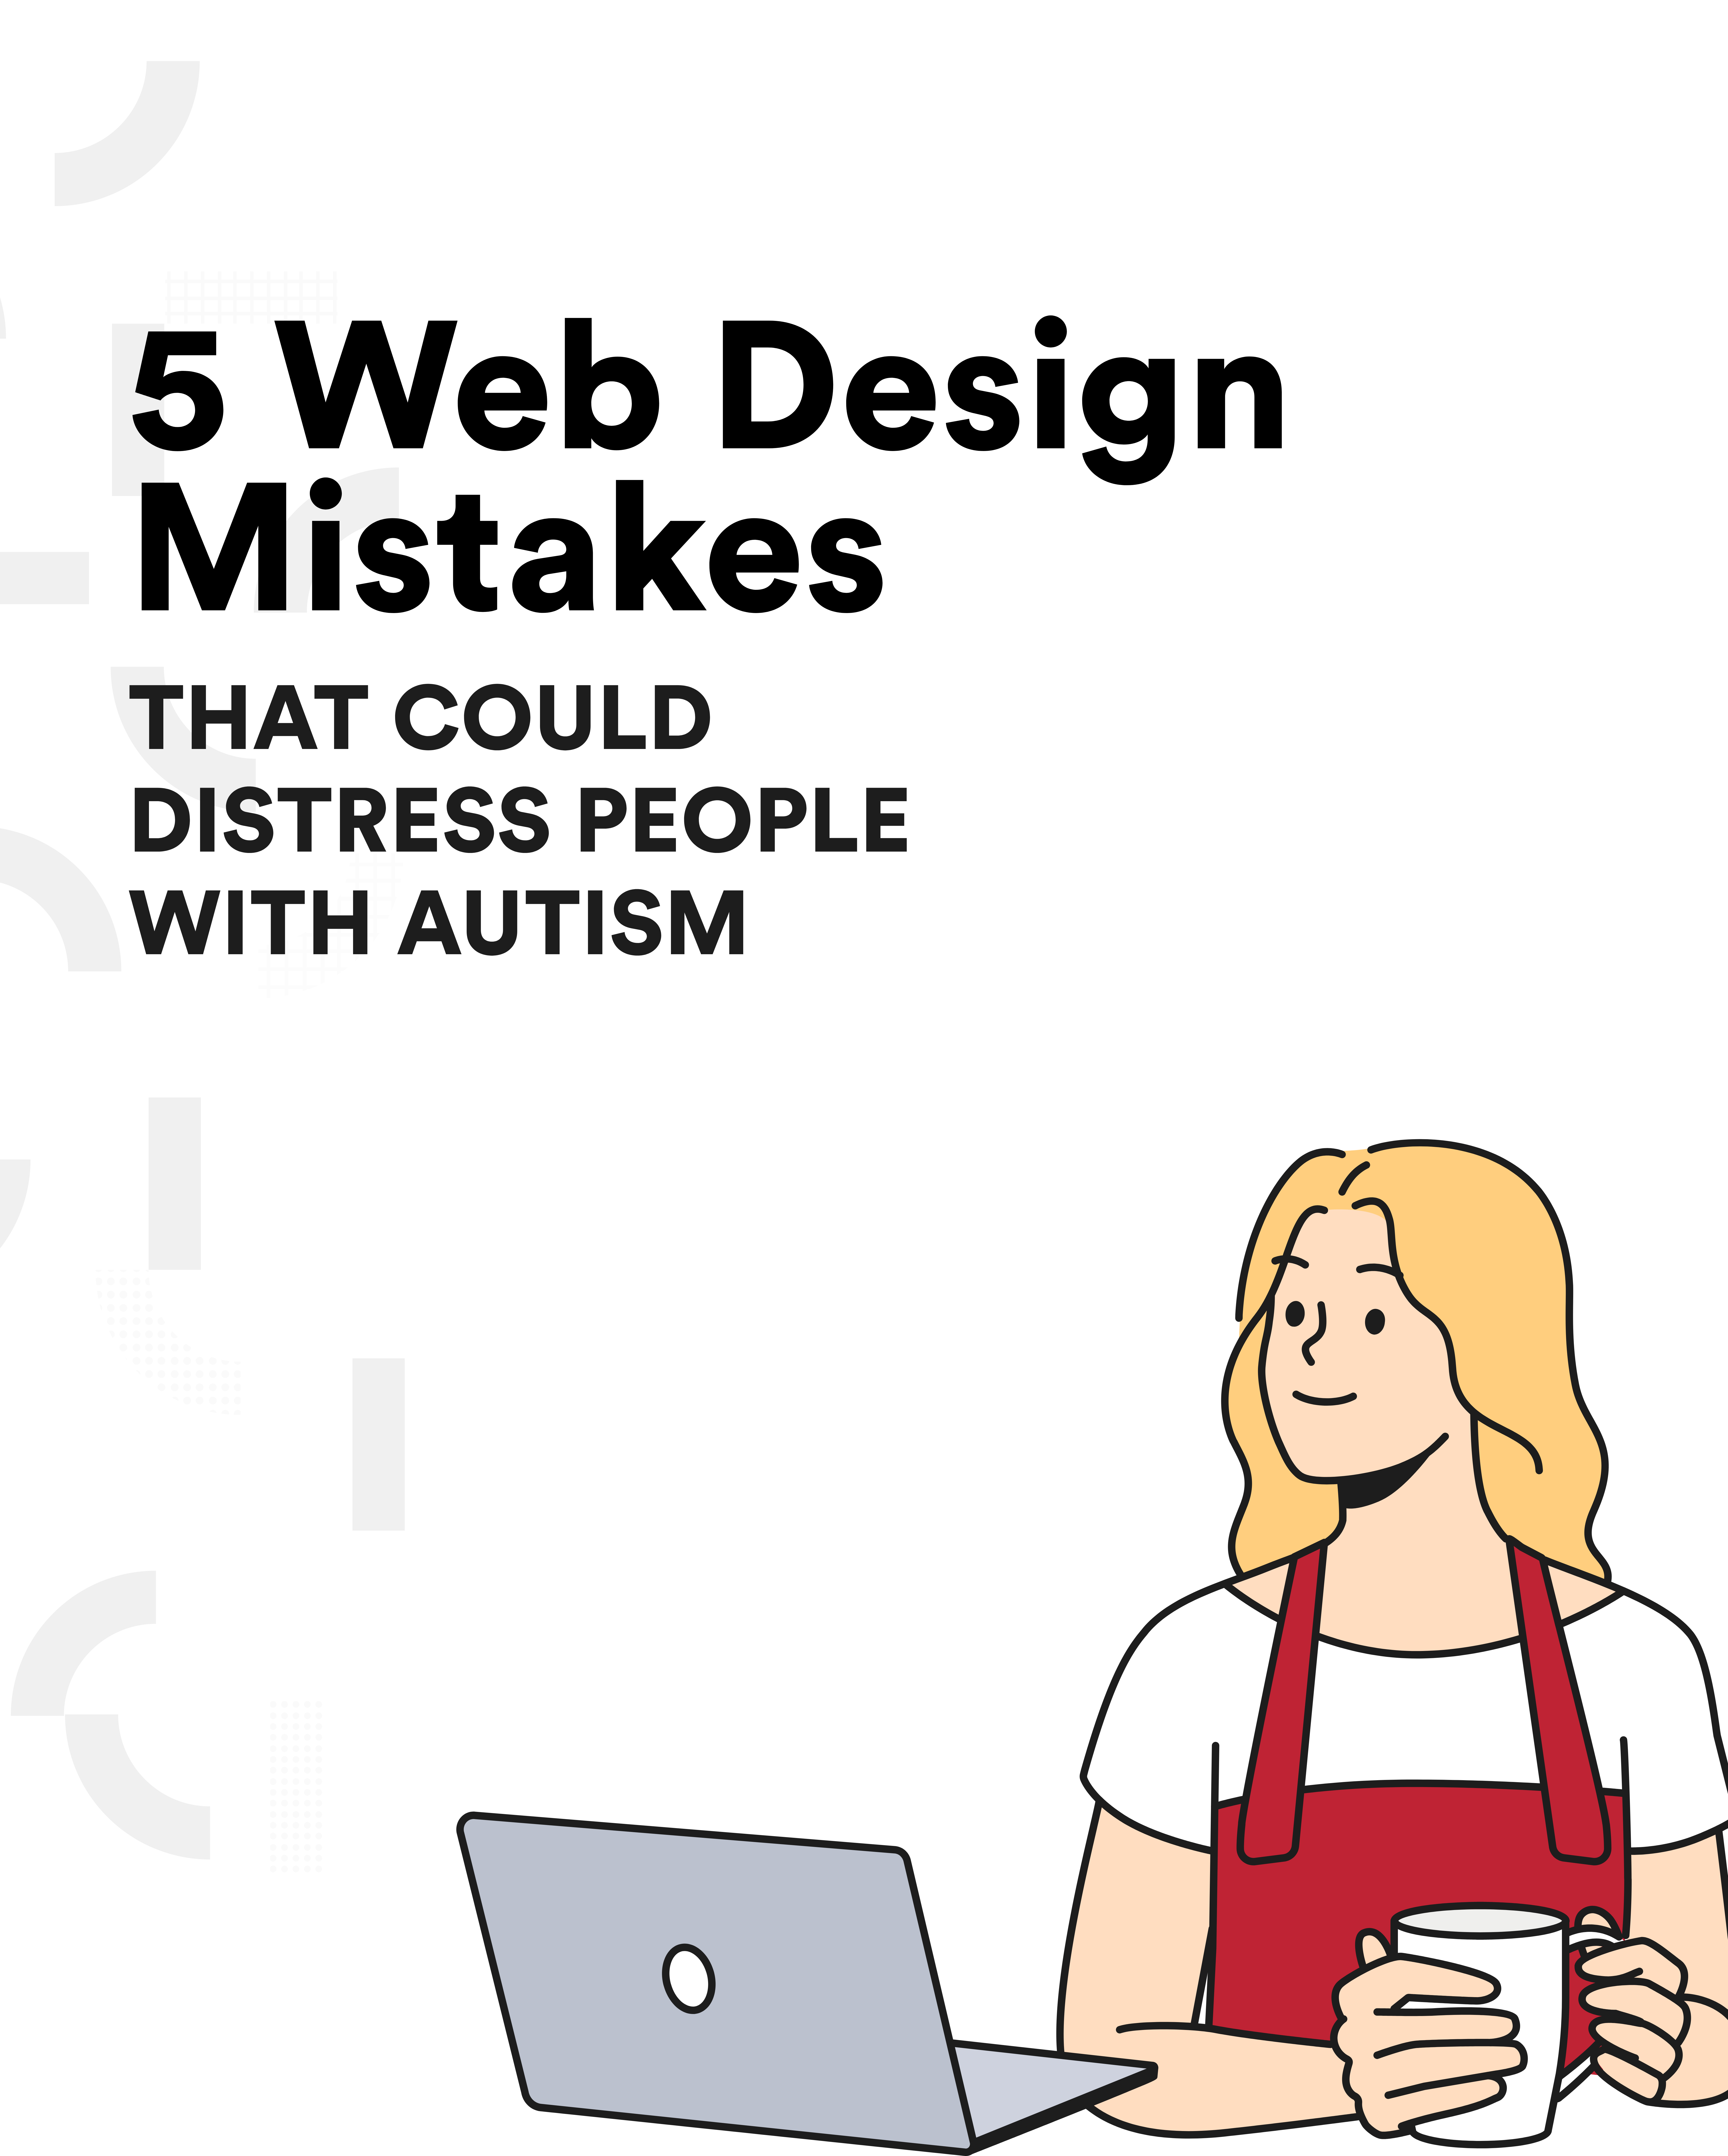 5 mistakes when you create an autism-friendly website design, website accessibility, or web design for autism.